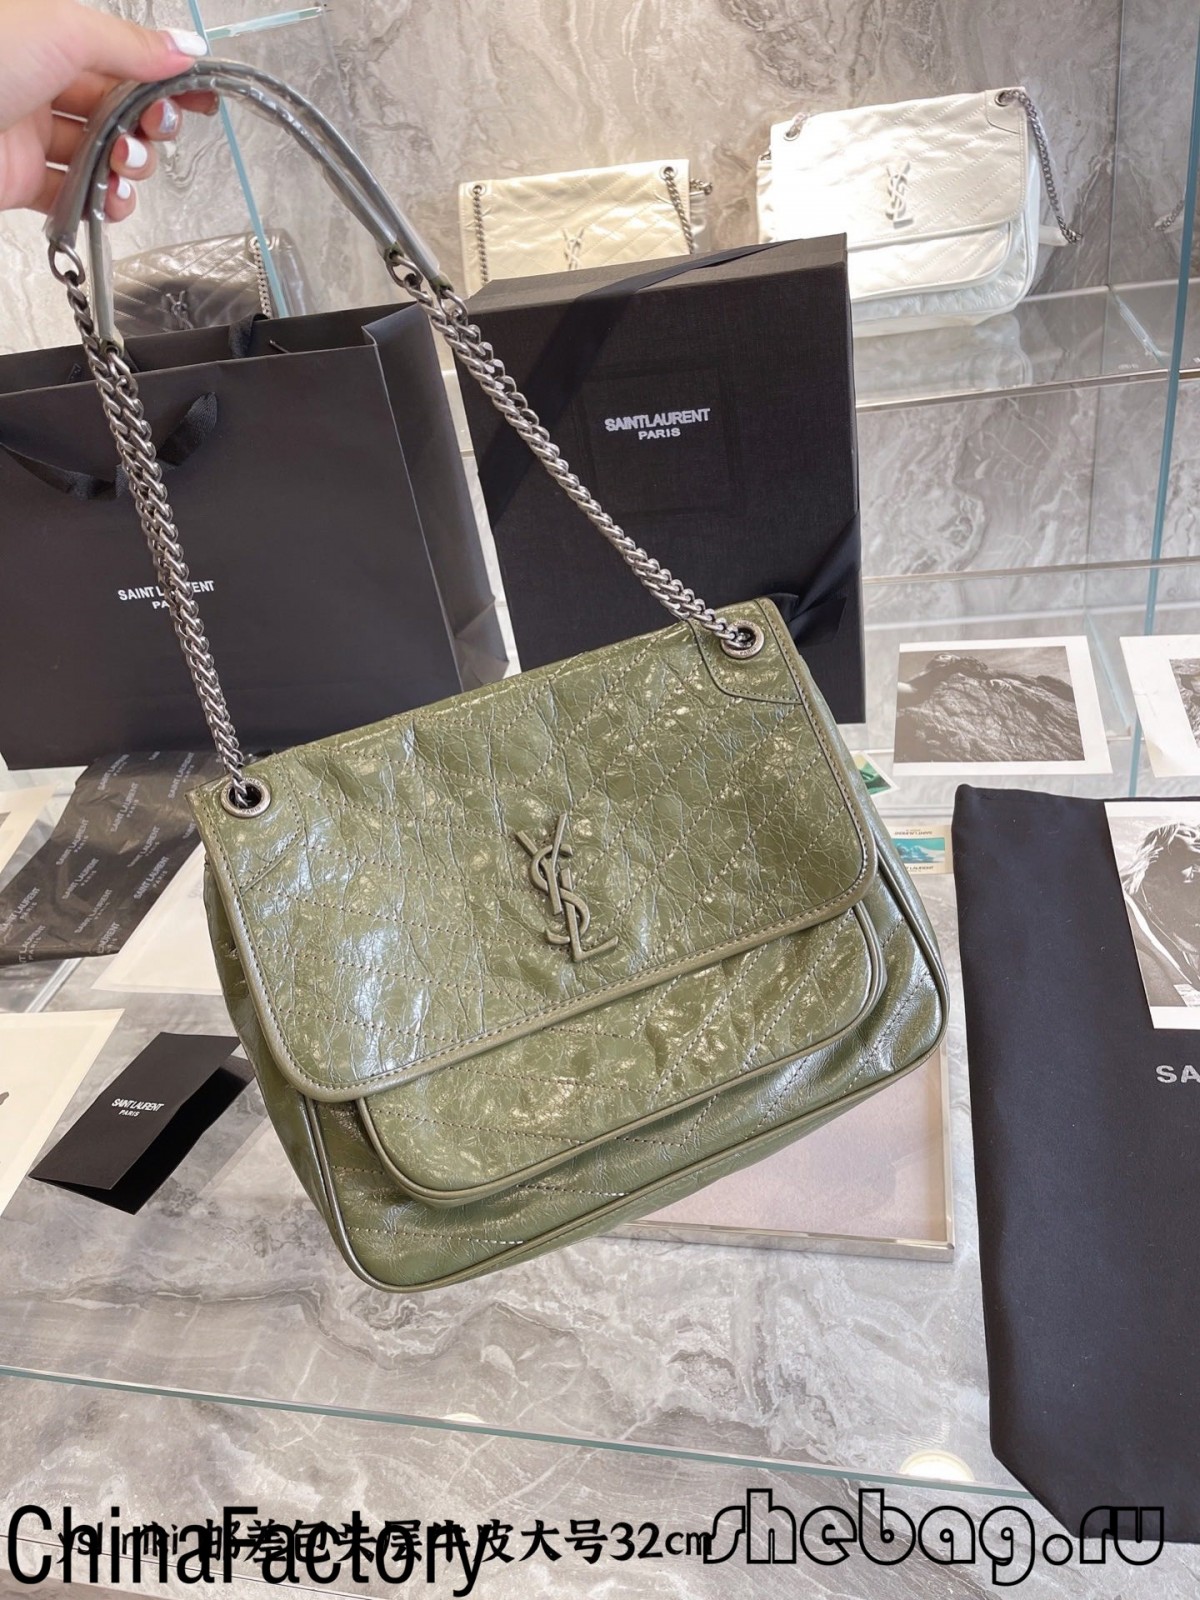 Where can I buy YSL replica bags？4 ways recommended (2022 Latest)-Best Quality Fake designer Bag Review, Replica designer bag ru